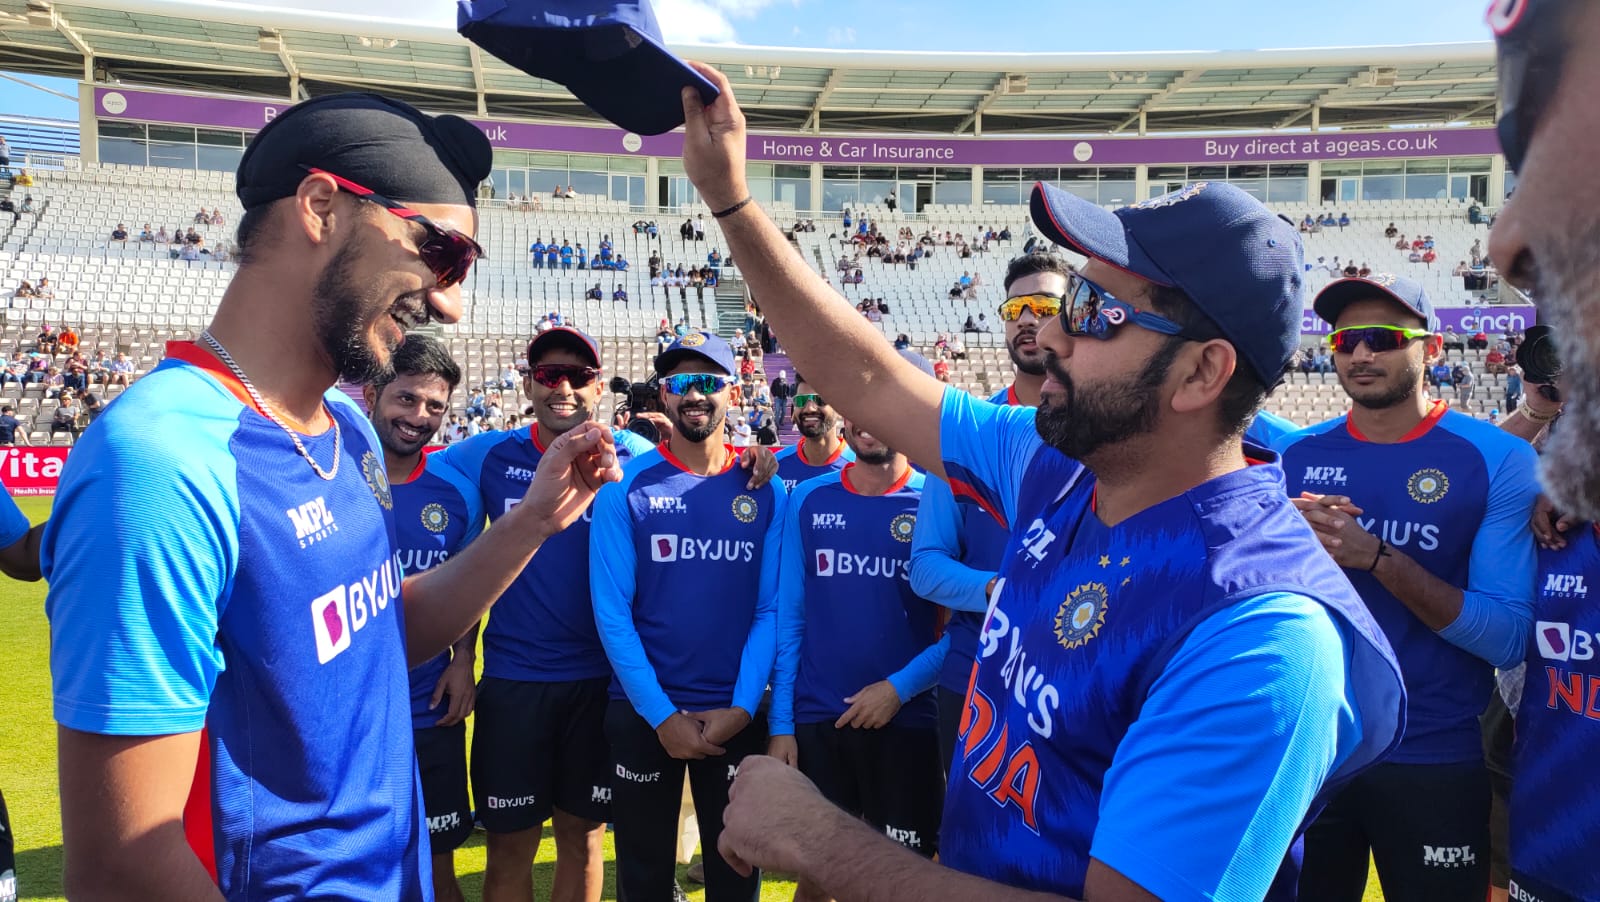 Left-arm seamer Arshdeep Singh will make his debut for Team India after being named in the playing XI for the first T20I against England in Southampton. The youngster received his Team India cap by skipper Rohit Sharma, minutes before the toss at the Rose Bowl. 